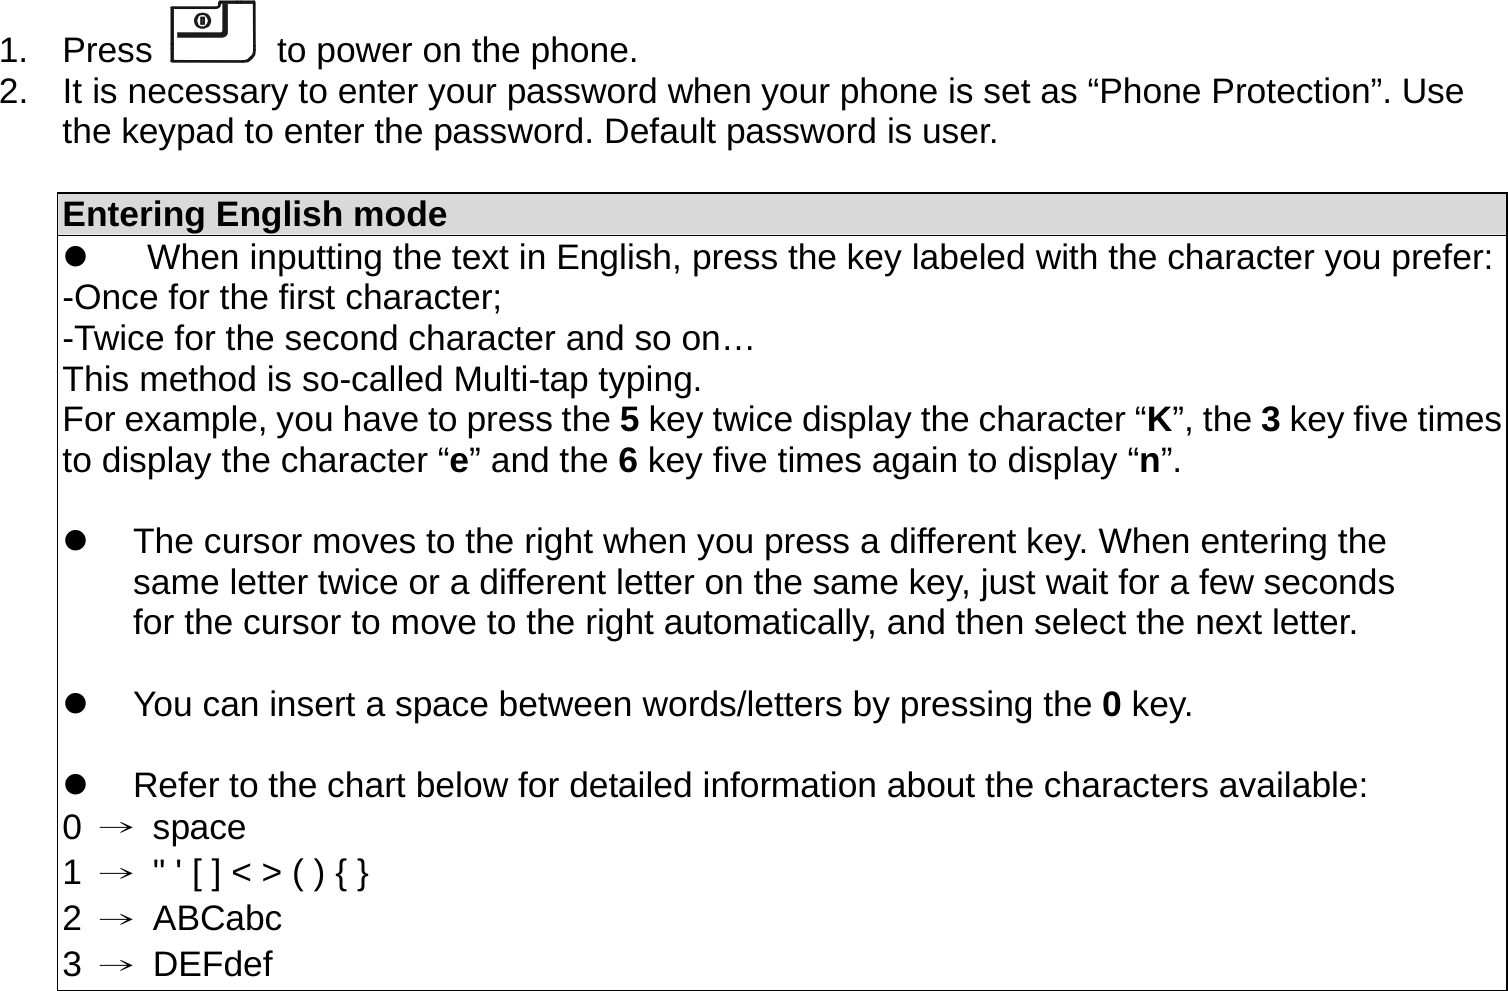 1. Press   to power on the phone. 2.  It is necessary to enter your password when your phone is set as “Phone Protection”. Use the keypad to enter the password. Default password is user.  Entering English mode   When inputting the text in English, press the key labeled with the character you prefer:-Once for the first character; -Twice for the second character and so on… This method is so-called Multi-tap typing. For example, you have to press the 5 key twice display the character “K”, the 3 key five times to display the character “e” and the 6 key five times again to display “n”.    The cursor moves to the right when you press a different key. When entering the same letter twice or a different letter on the same key, just wait for a few seconds for the cursor to move to the right automatically, and then select the next letter.    You can insert a space between words/letters by pressing the 0 key.    Refer to the chart below for detailed information about the characters available: 0  → space 1  →  &quot; &apos; [ ] &lt; &gt; ( ) { } 2  → ABCabc 3  → DEFdef 